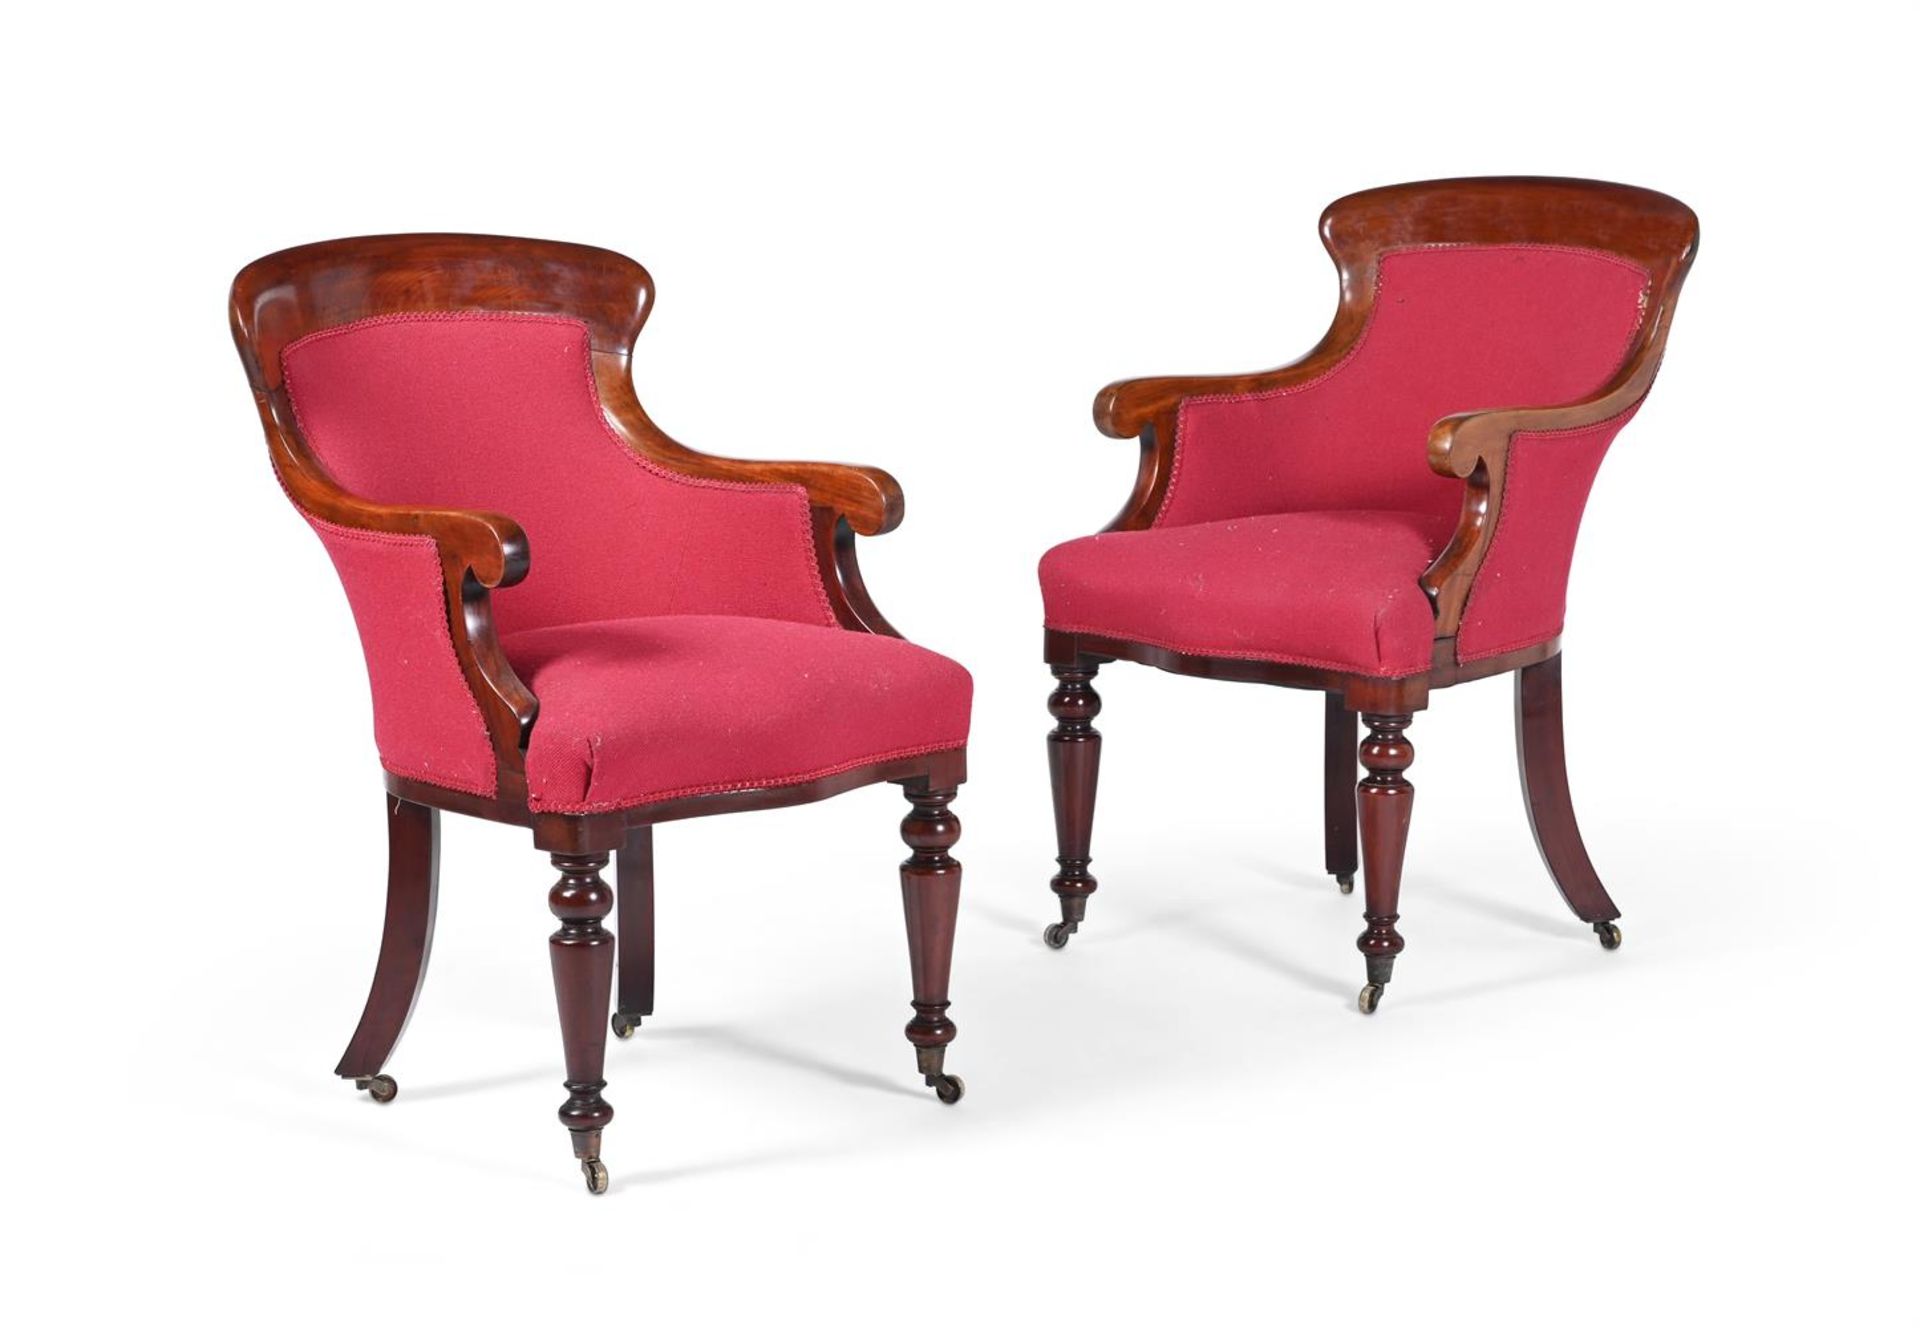 A PAIR OF WILLIAM IV MAHOGANY CURRICLE ARMCHAIRS, CIRCA 1835